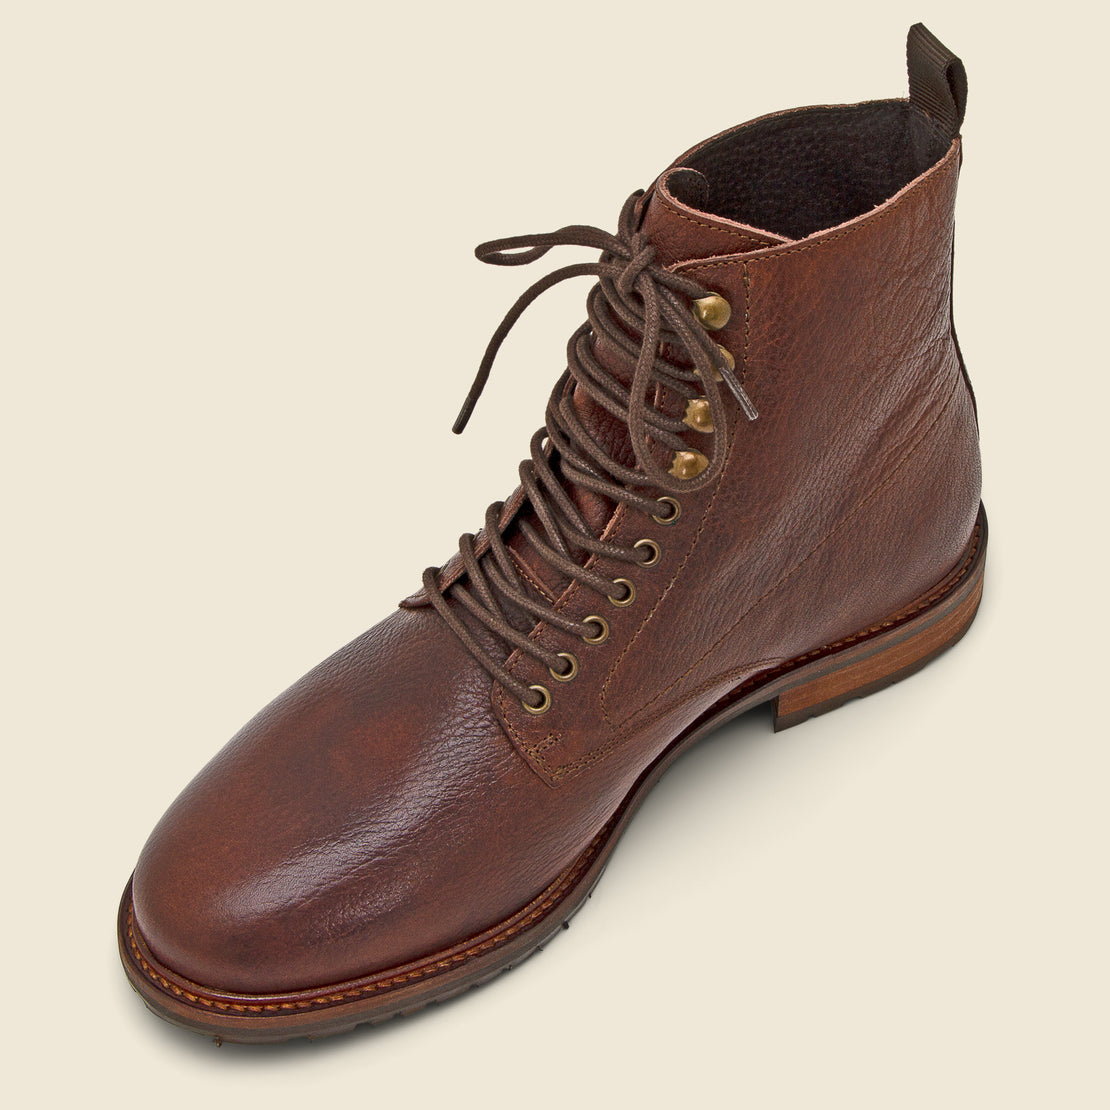 York Leather Lace Boot - Brown - Shoe the Bear - STAG Provisions - Shoes - Boots / Chukkas